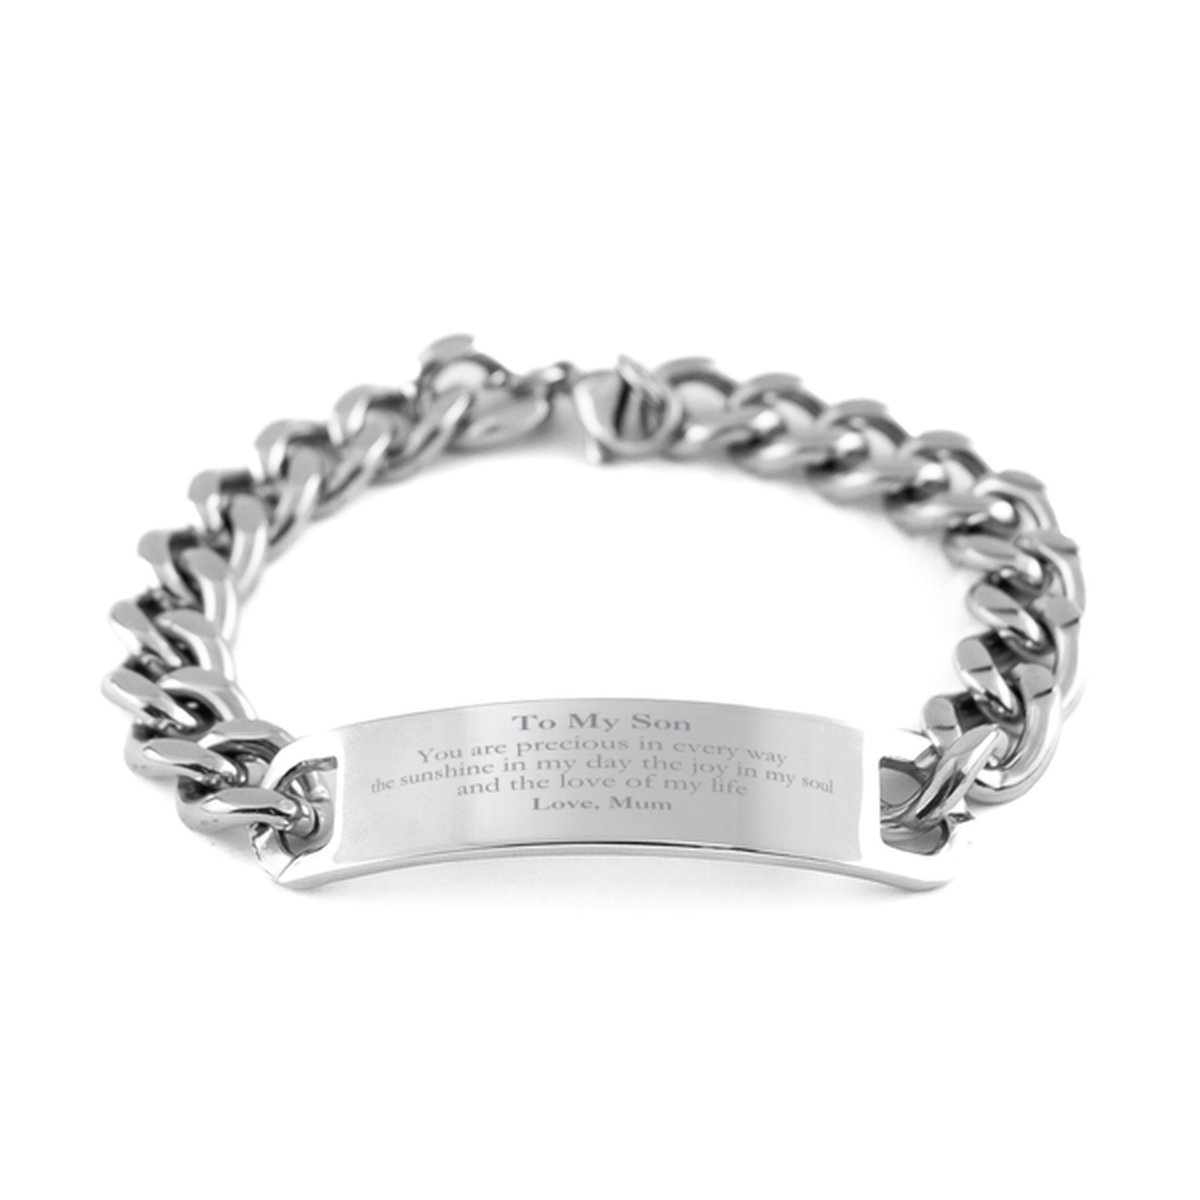 Graduation Gifts for Son Cuban Chain Stainless Steel Bracelet Present from Mum, Christmas Son Birthday Gifts Son You are precious in every way the sunshine in my day. Love, Mum